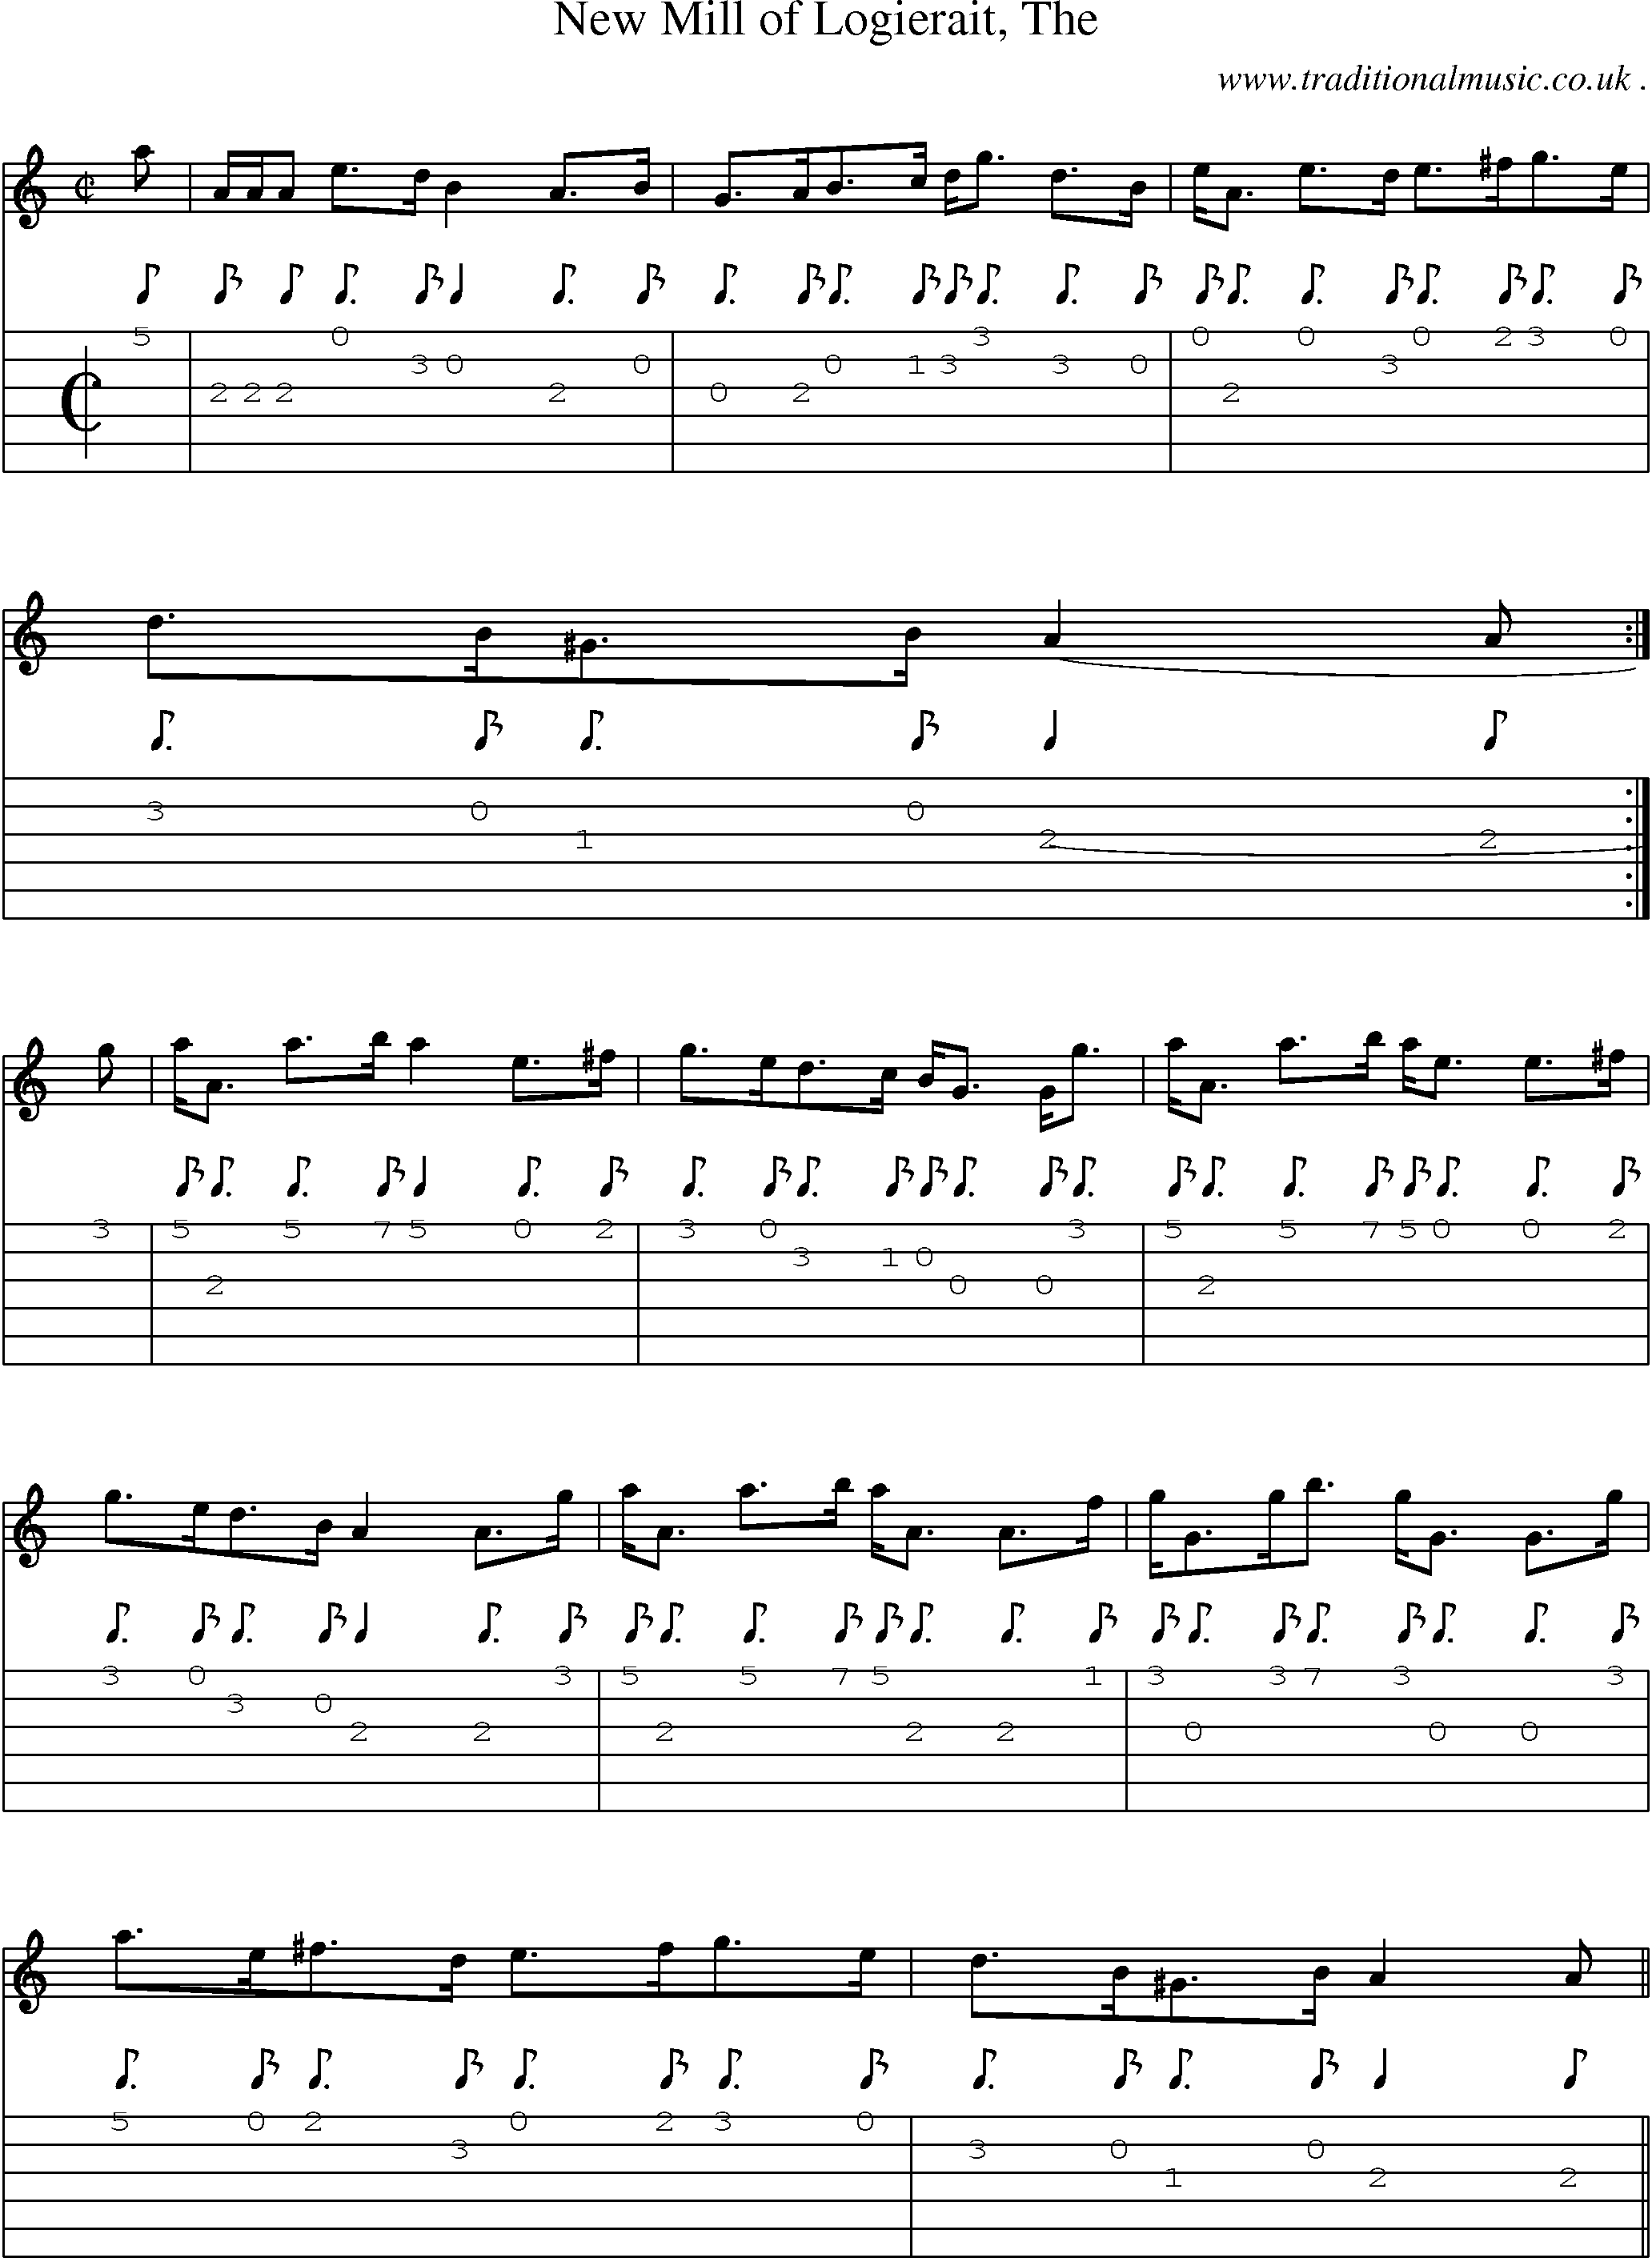 Sheet-music  score, Chords and Guitar Tabs for New Mill Of Logierait The